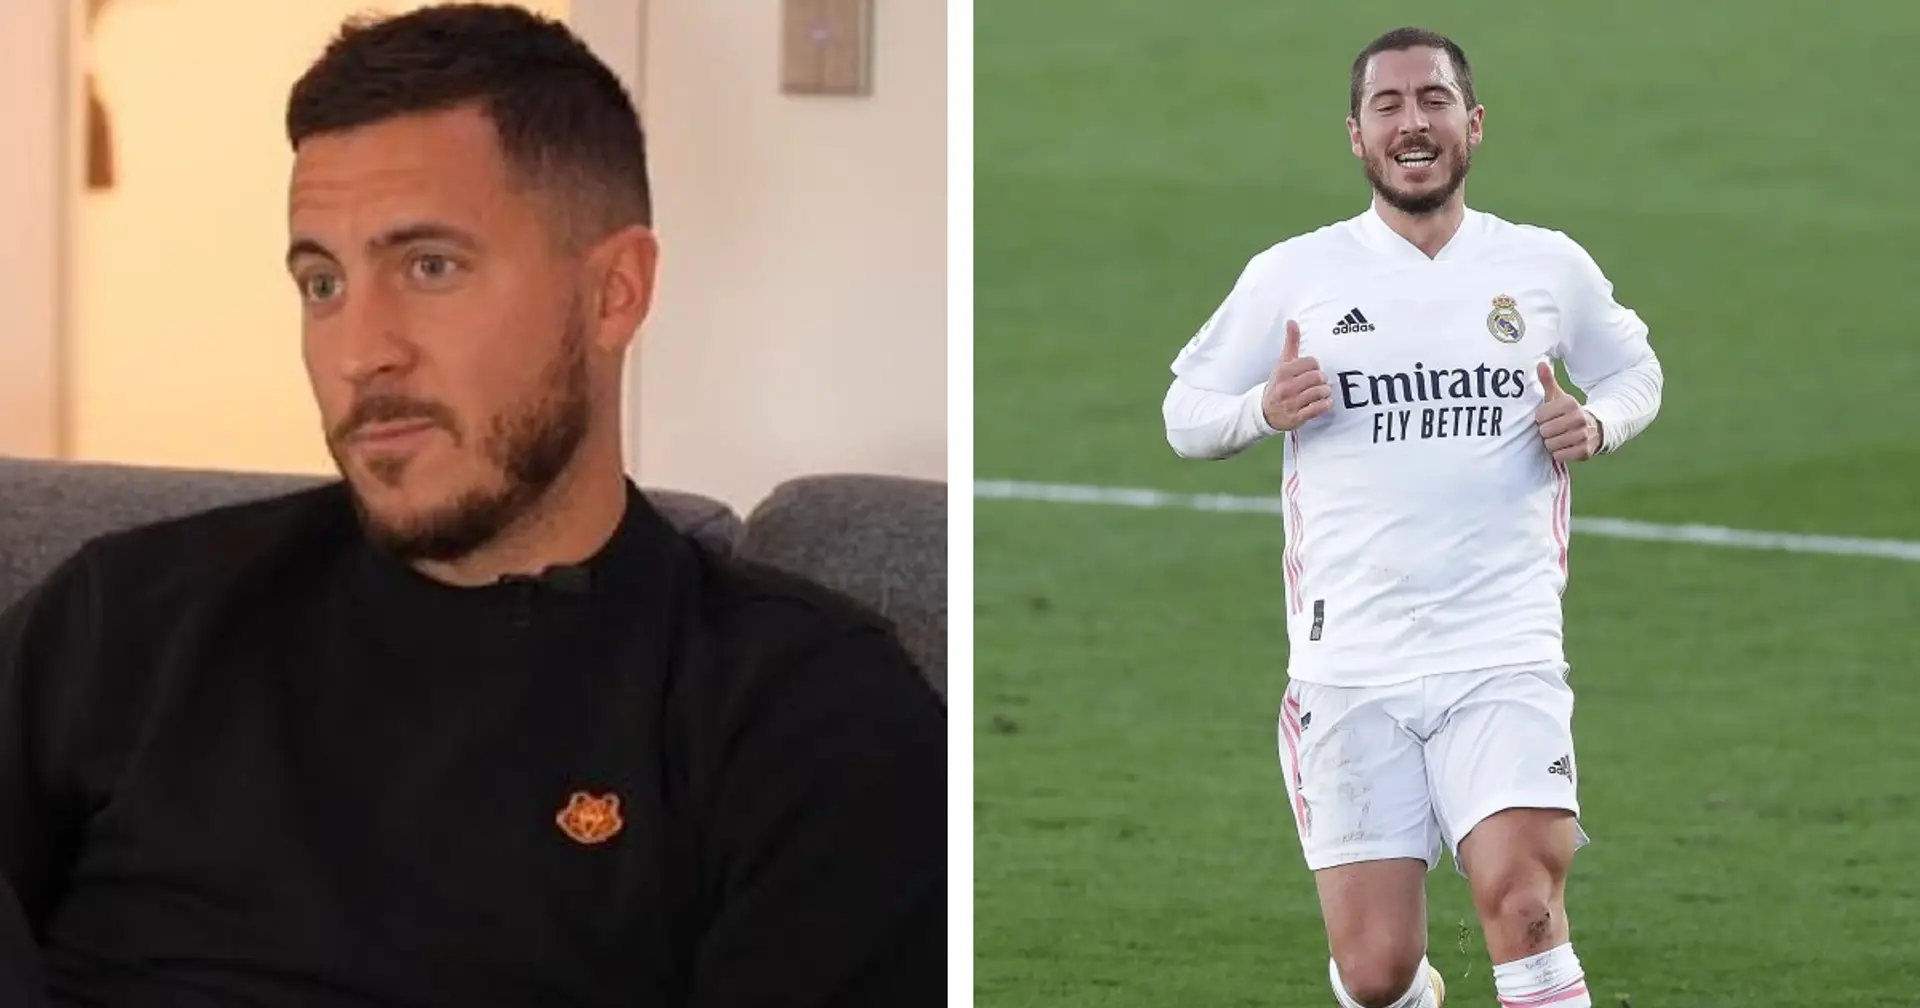 'I let go of myself': Hazard opens up on weight issues – says 'dieting is bullsh*t' and doesn't work